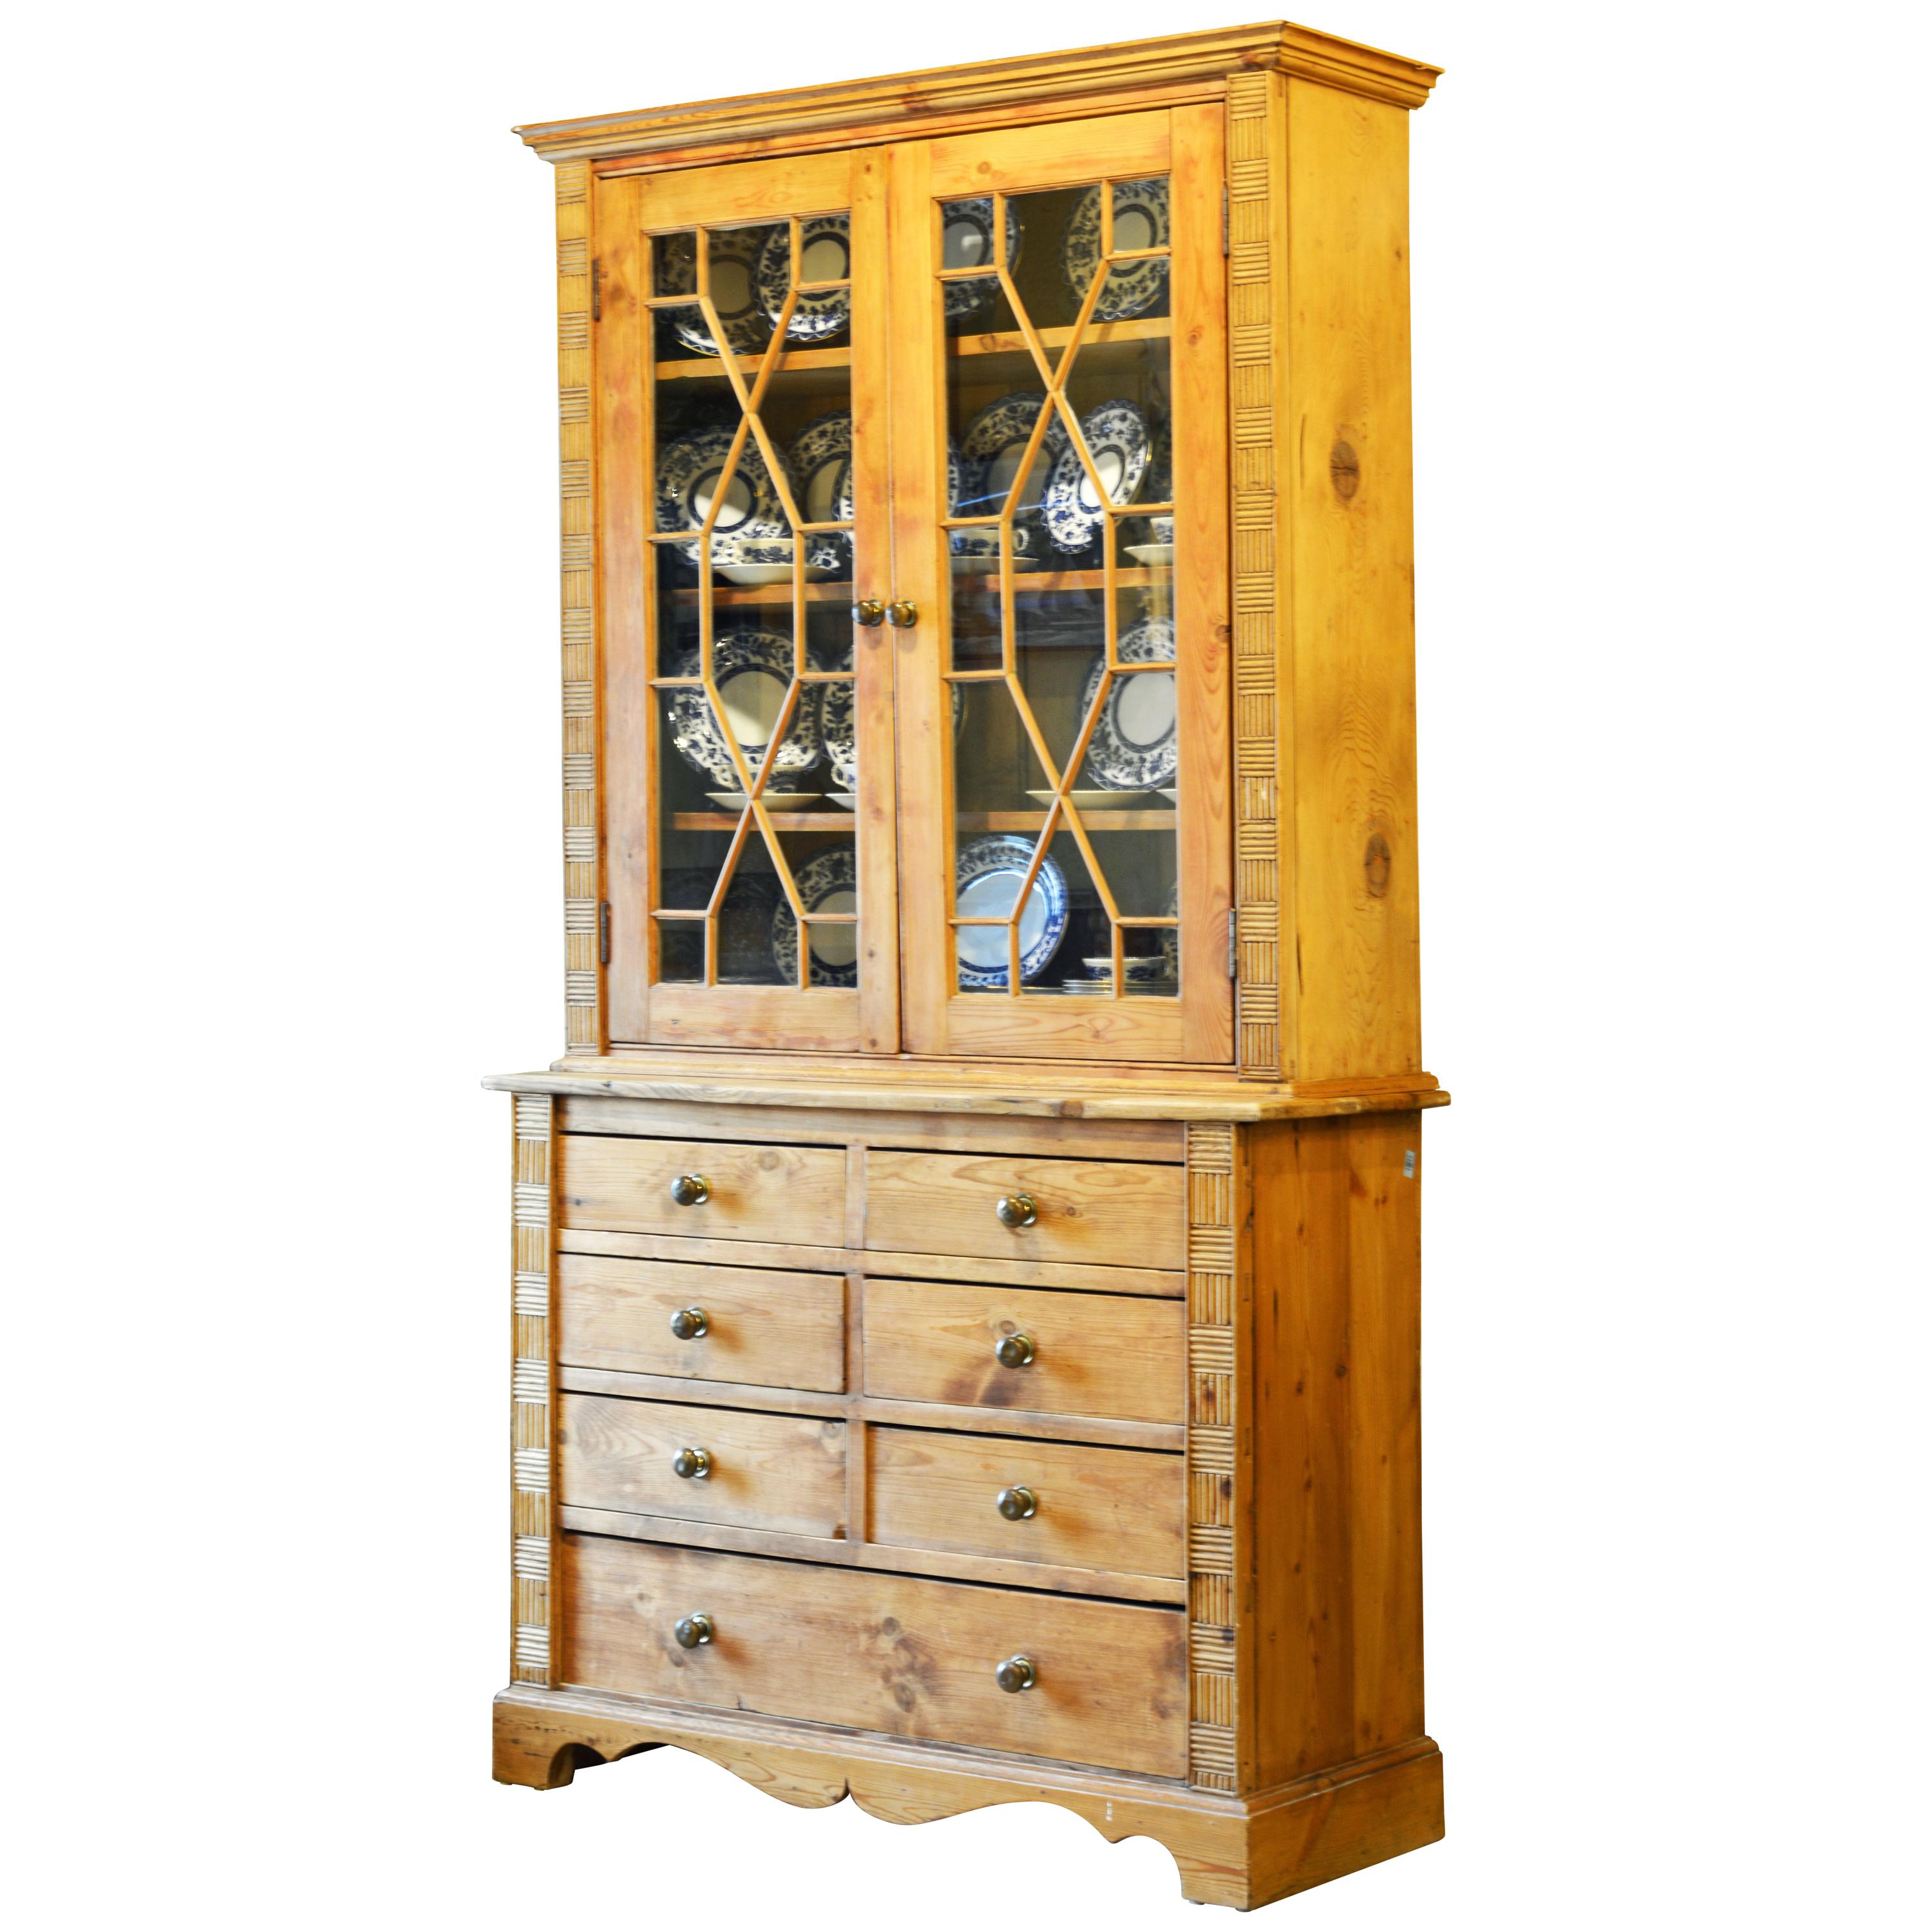 English Country Style Two-Part Step Back Pine Cupboard with Glass Doors